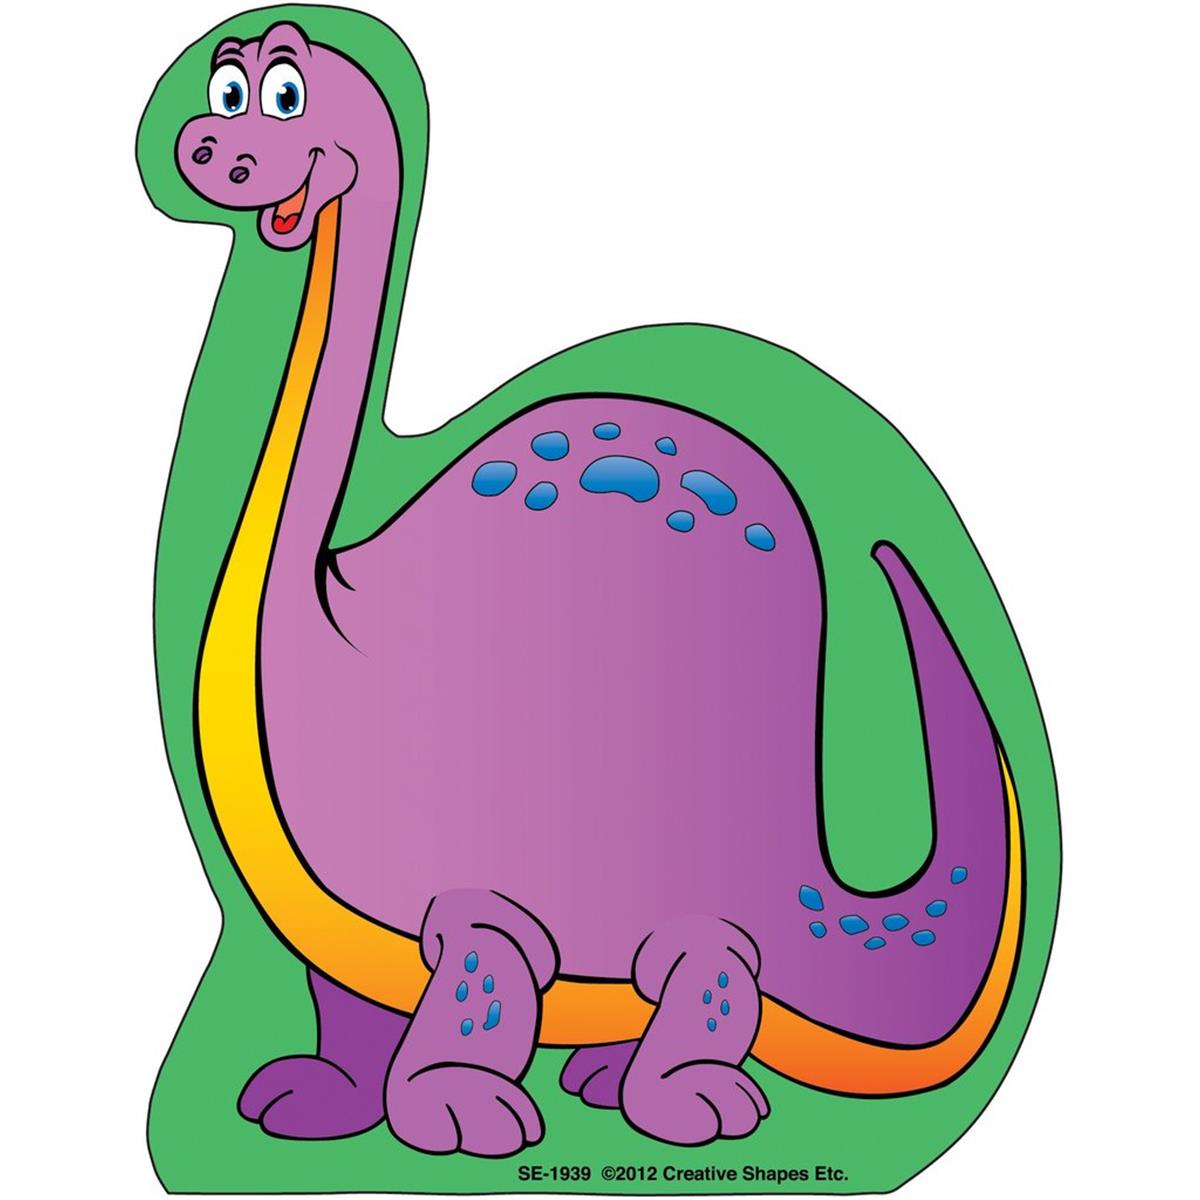 Se-1939 9 X 6 In. Large Notepad, Brontosaurus - 50 Sheets Per Pack